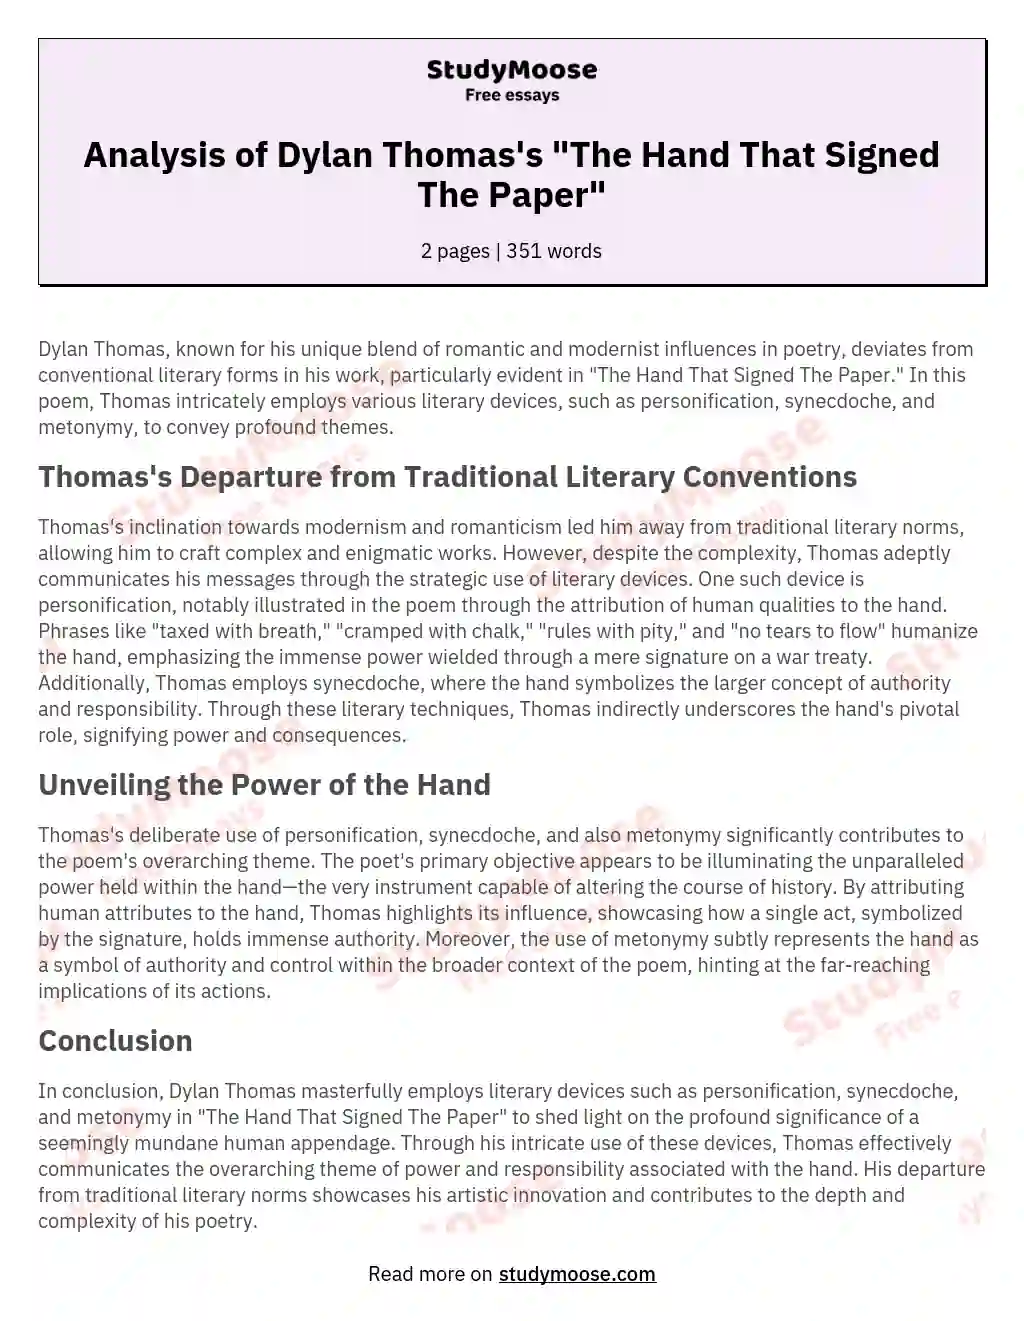 Analysis of Dylan Thomas's "The Hand That Signed The Paper" essay